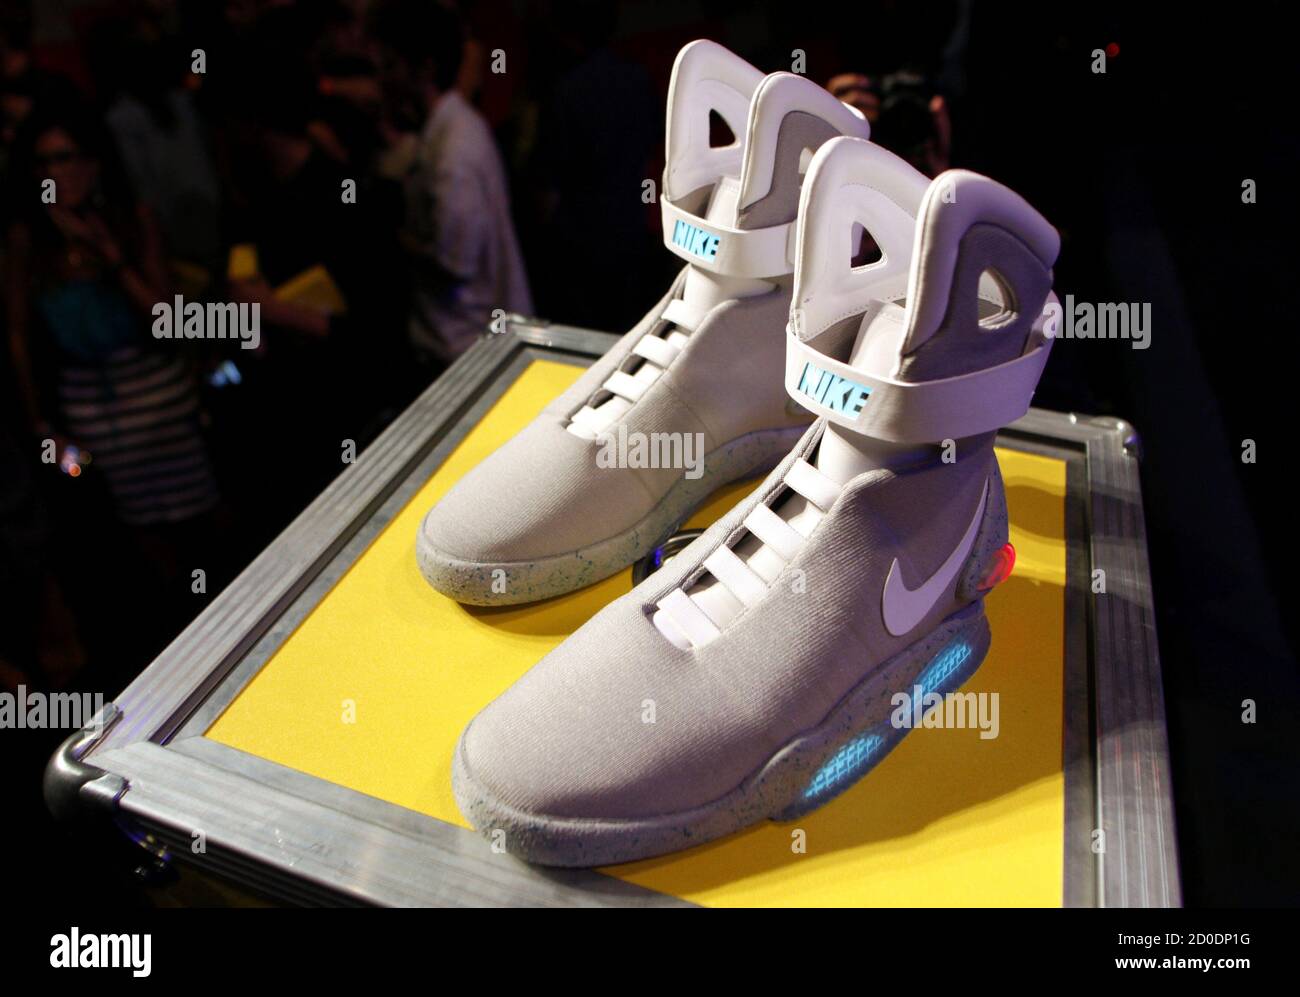 A pair of 2011 NIKE MAG shoes, based on the original NIKE MAG worn in 2015  by the 